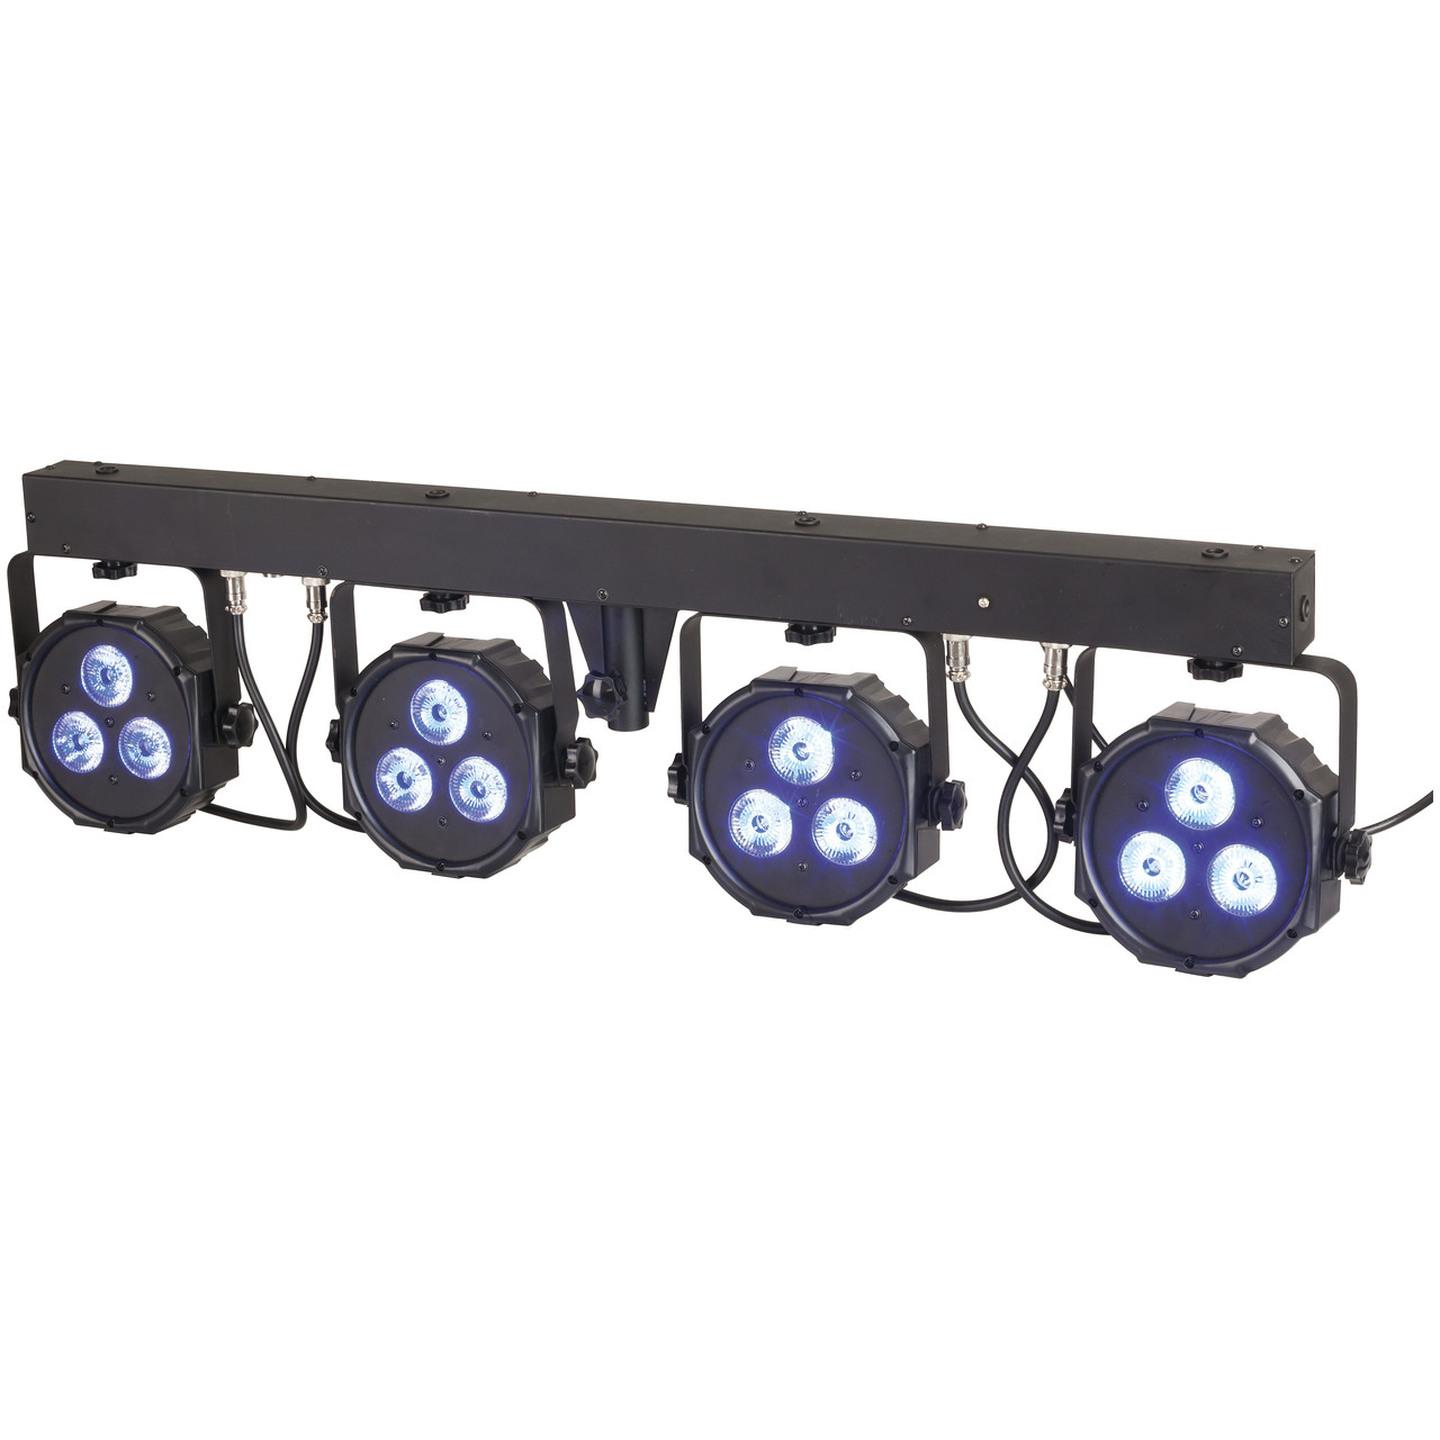 LED Lighting Rig with Stand and Controller